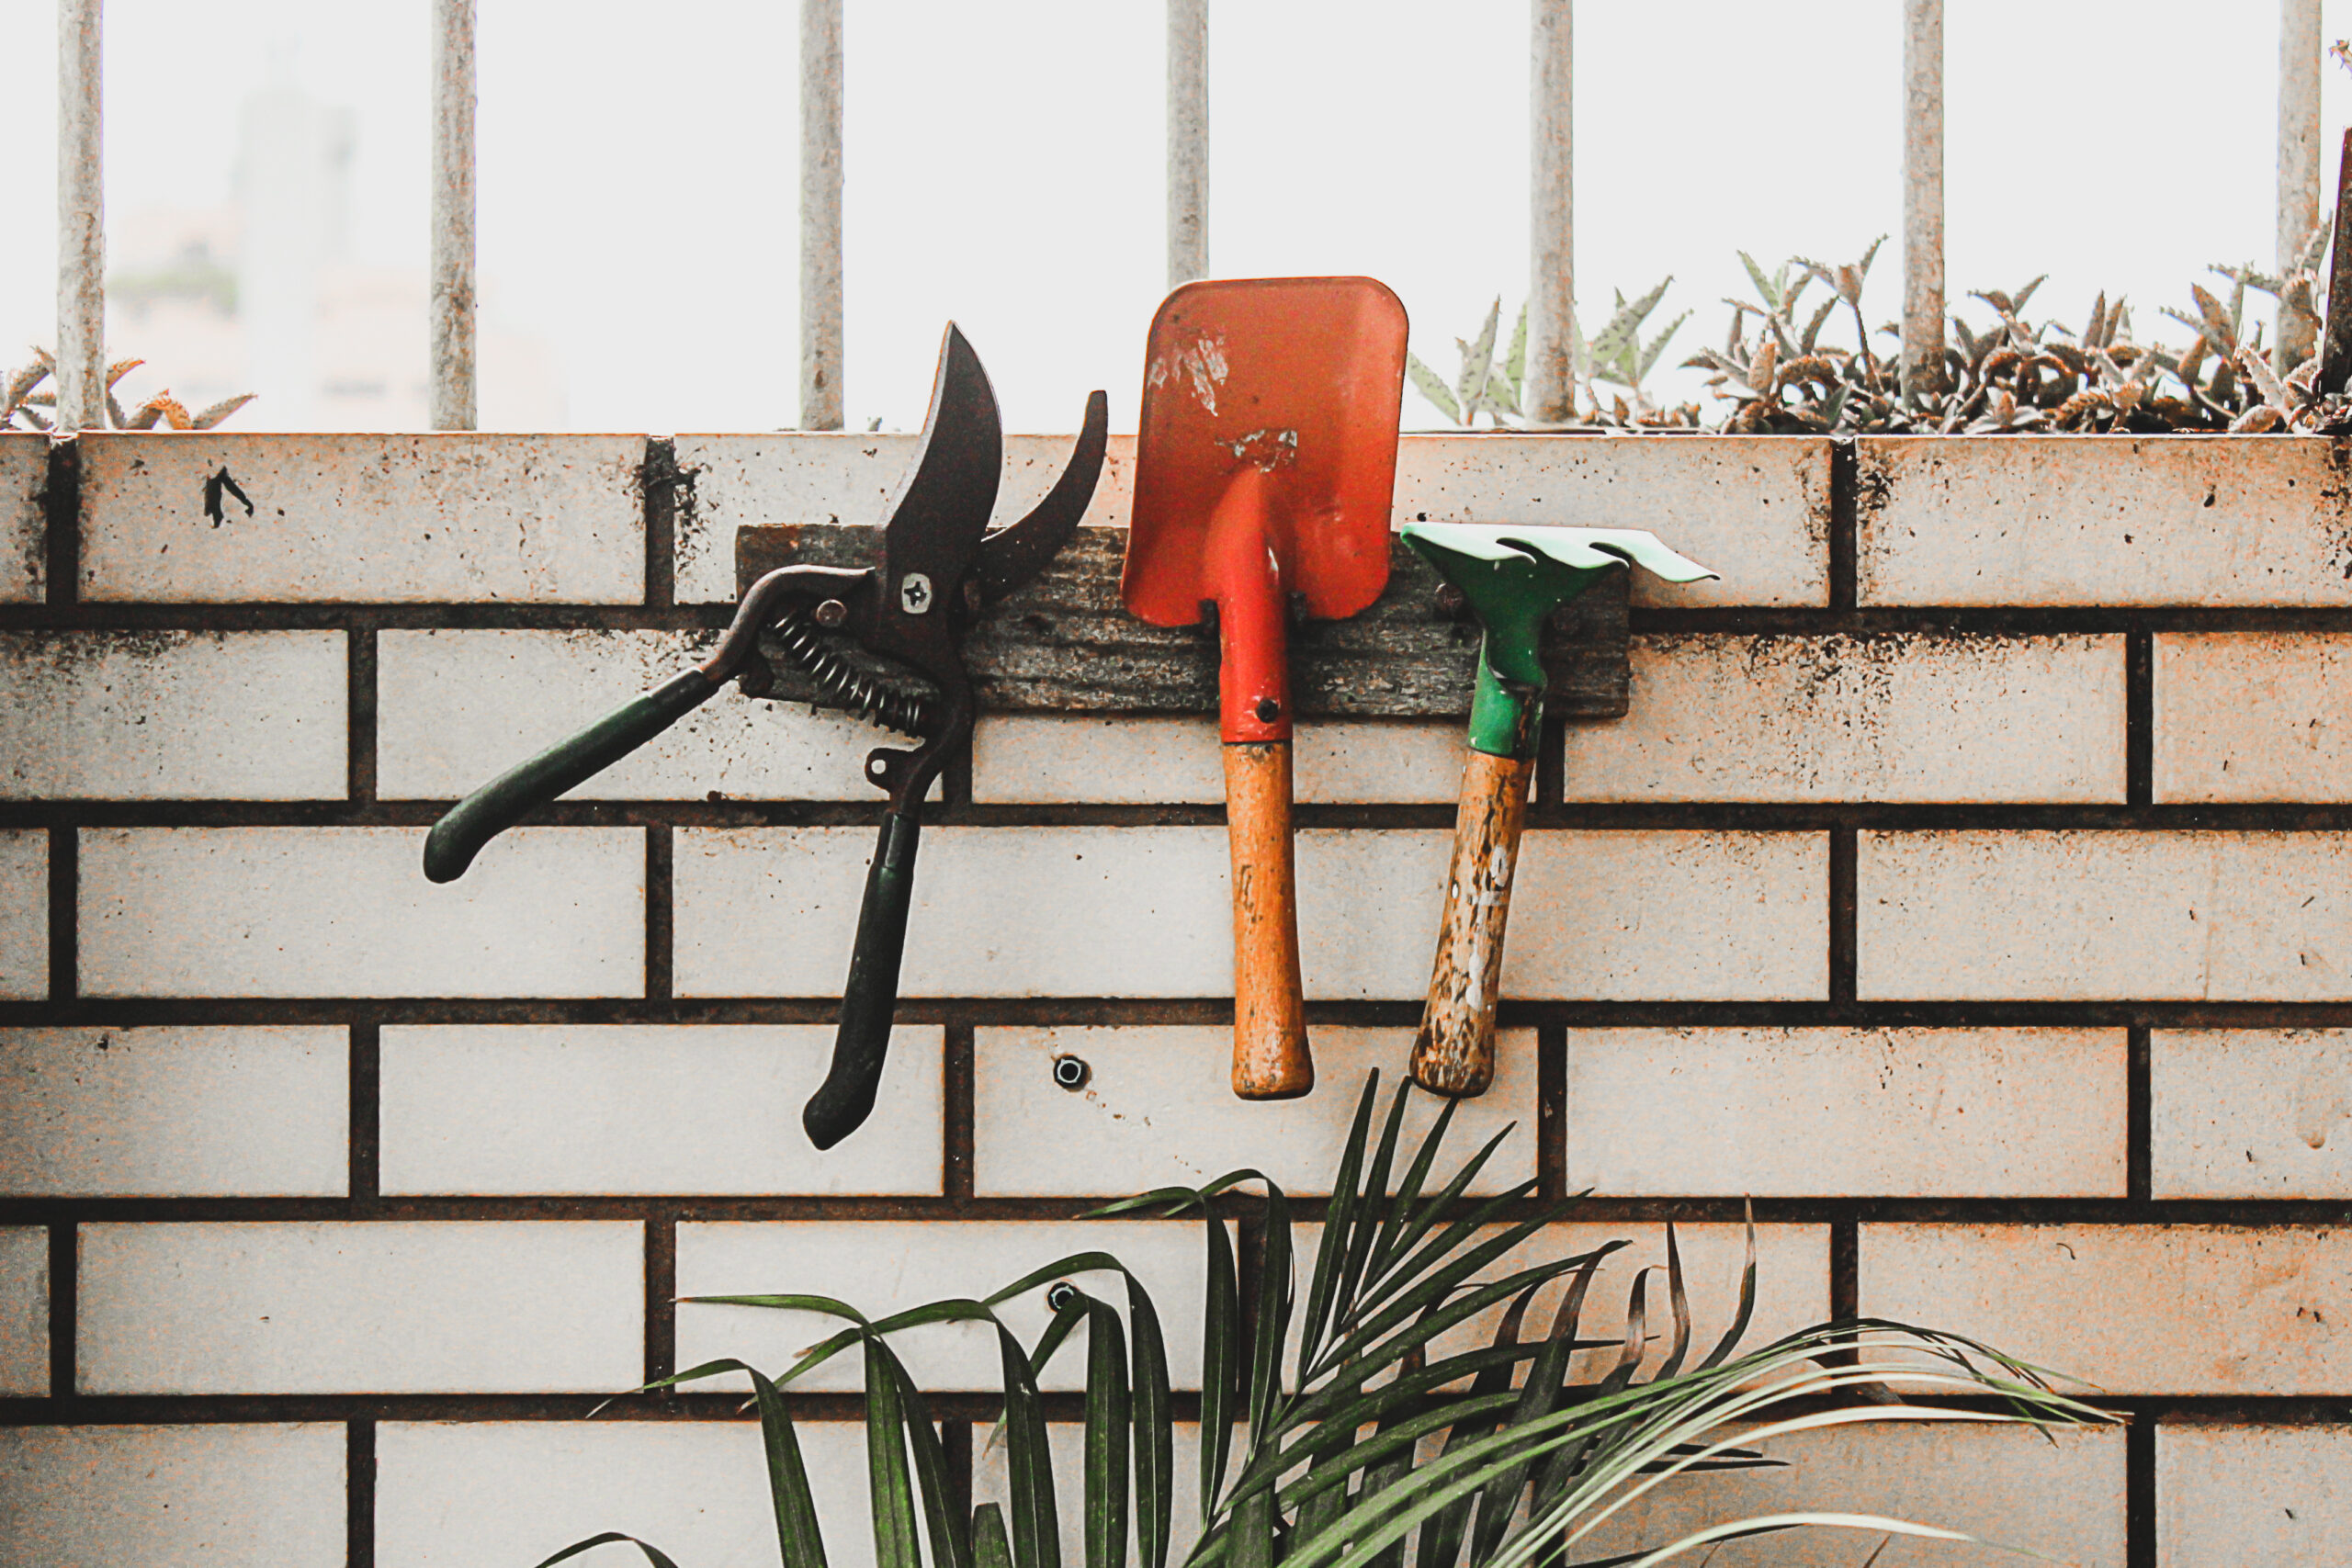 Shop Talk Vol. 4: Summer Home Maintenance Projects You Should Prioritize